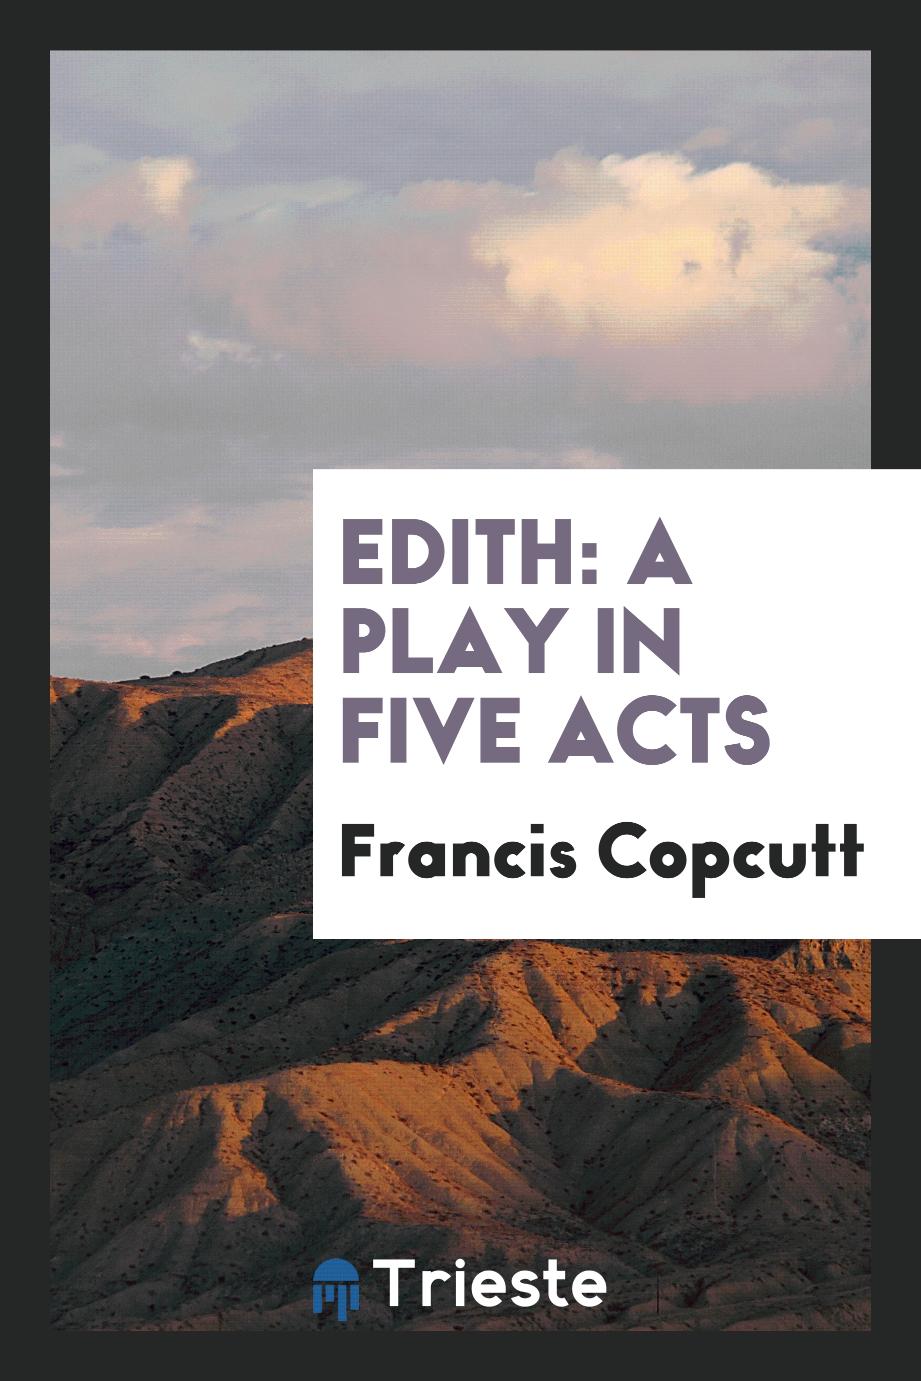 Edith: A Play in Five Acts